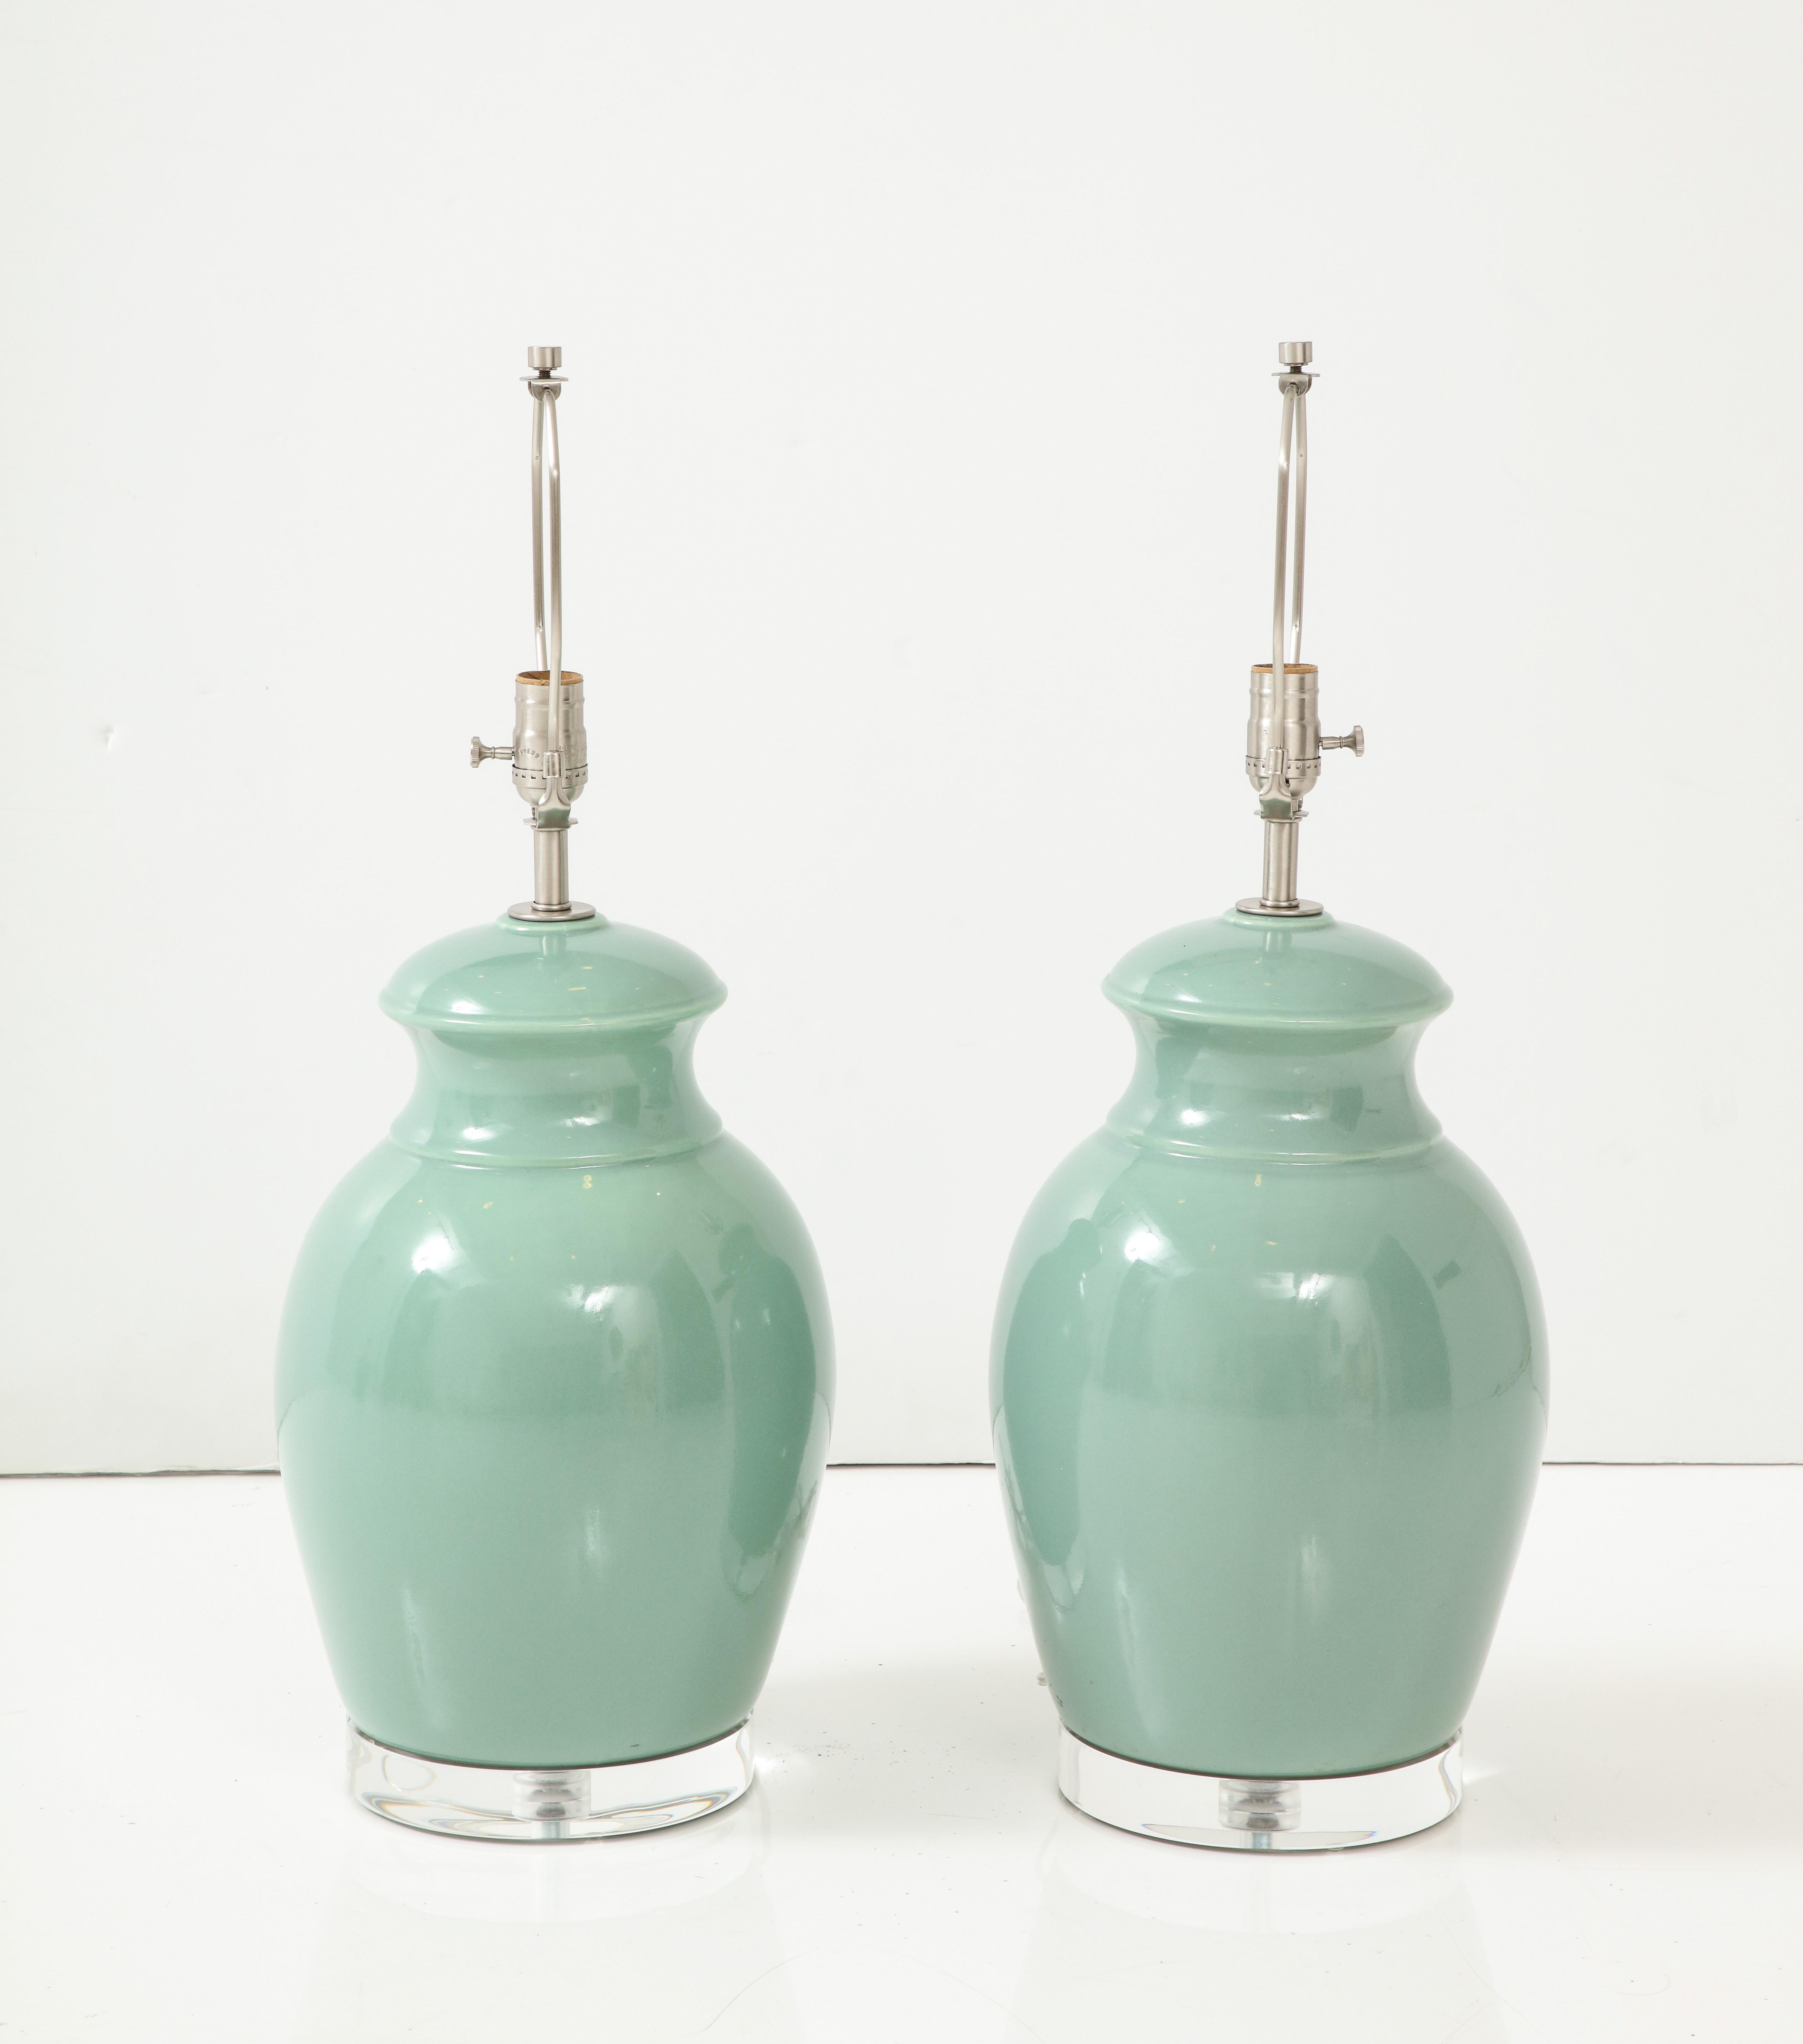 Mid Century pair of ceramic lamps featuring a Turquoise glaze and sitting upon custom Lucite bases. Rewired for use in the USA. 100W bulb max. Lamps rewired by an UL listed electrician using brushed nickel hardware. 